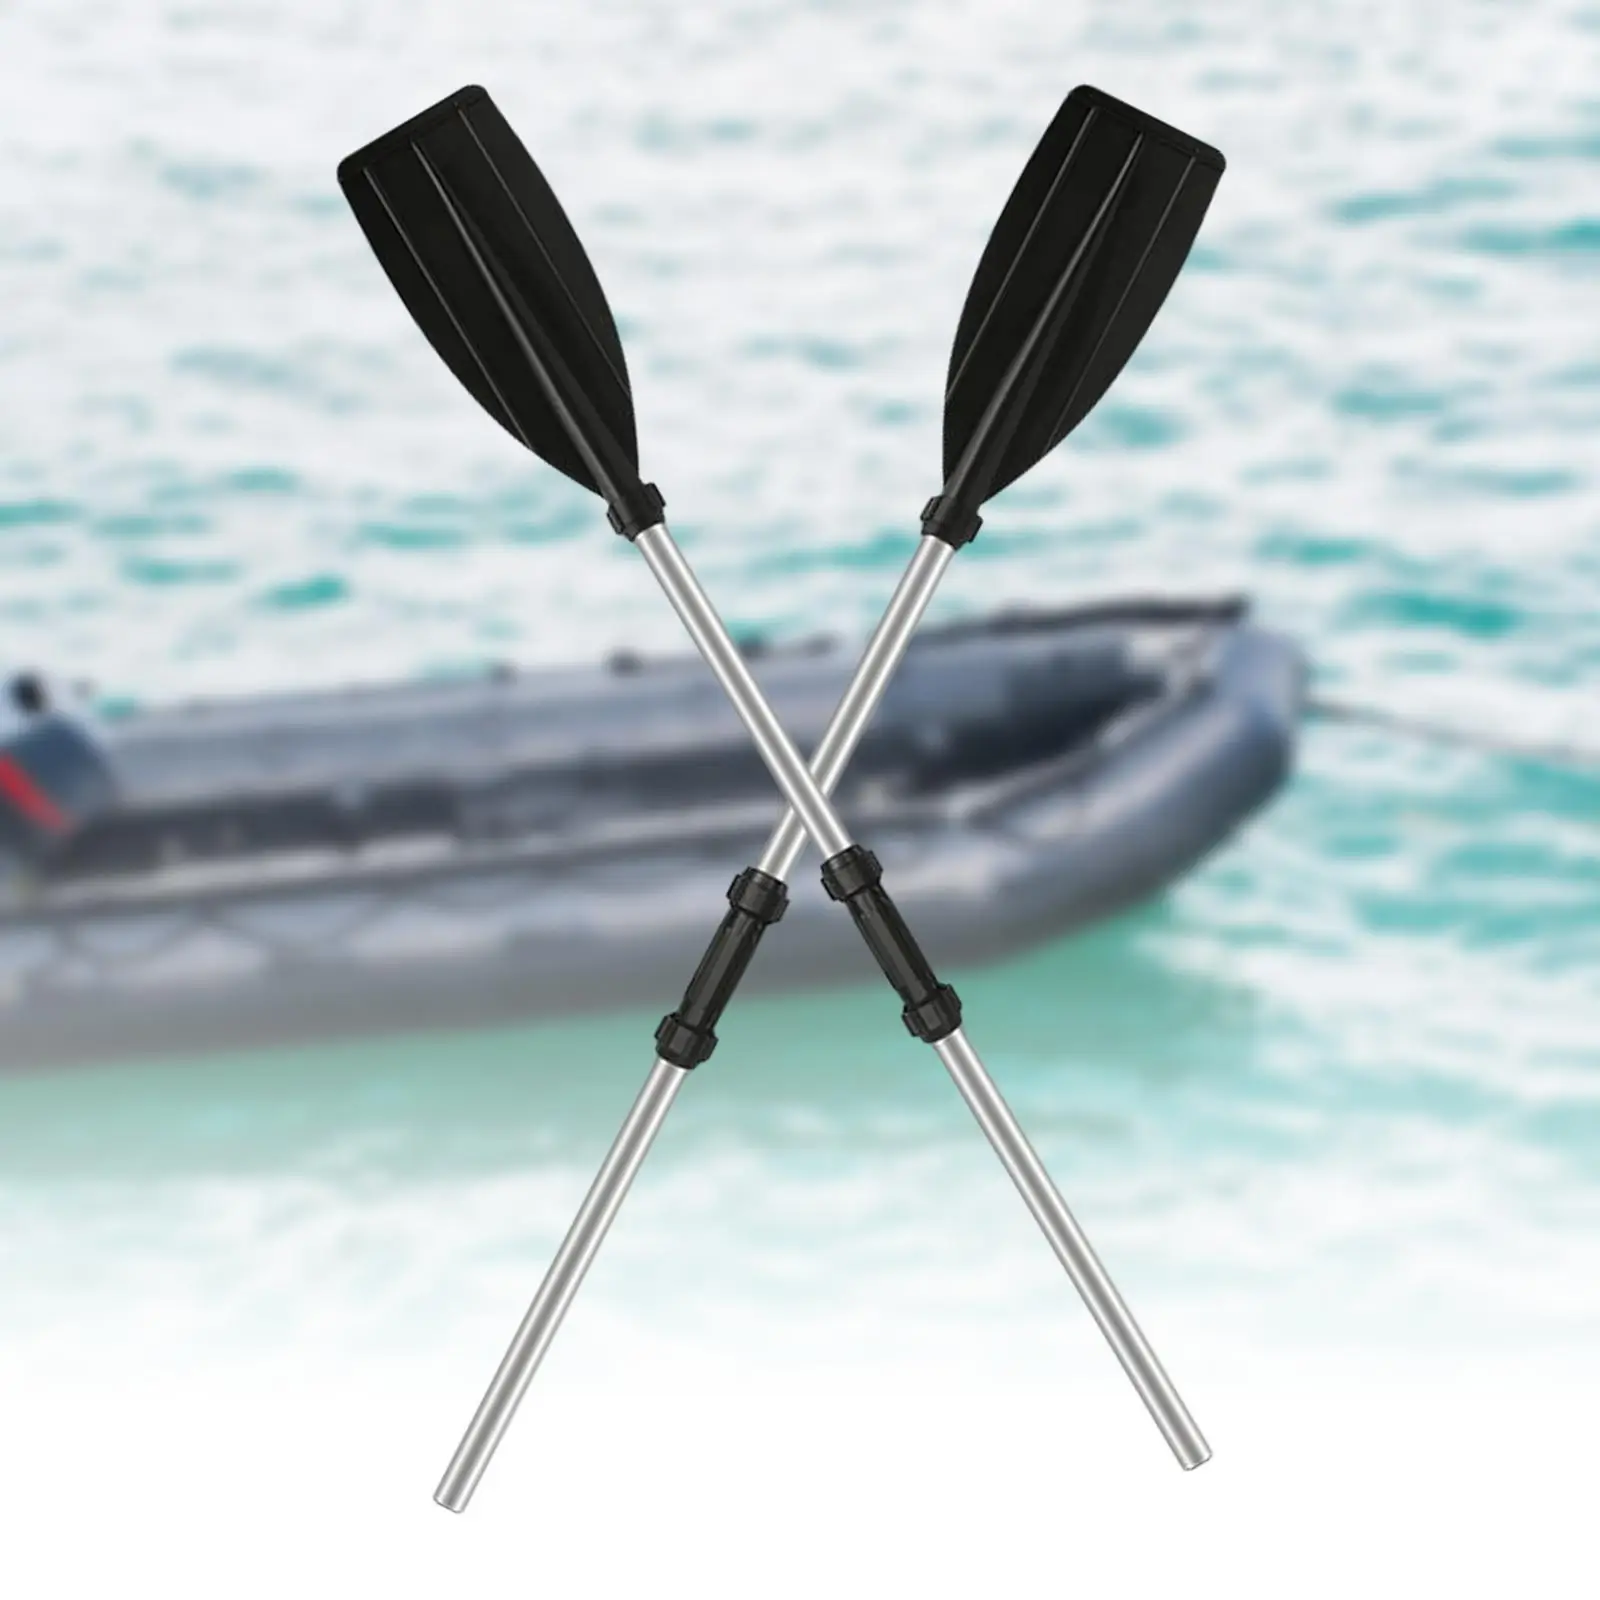 Universal Kayak Boat Rafting Paddle Aluminium Alloy Lightweight Stand up Paddle Board for Outside Activities Rafting Fitting